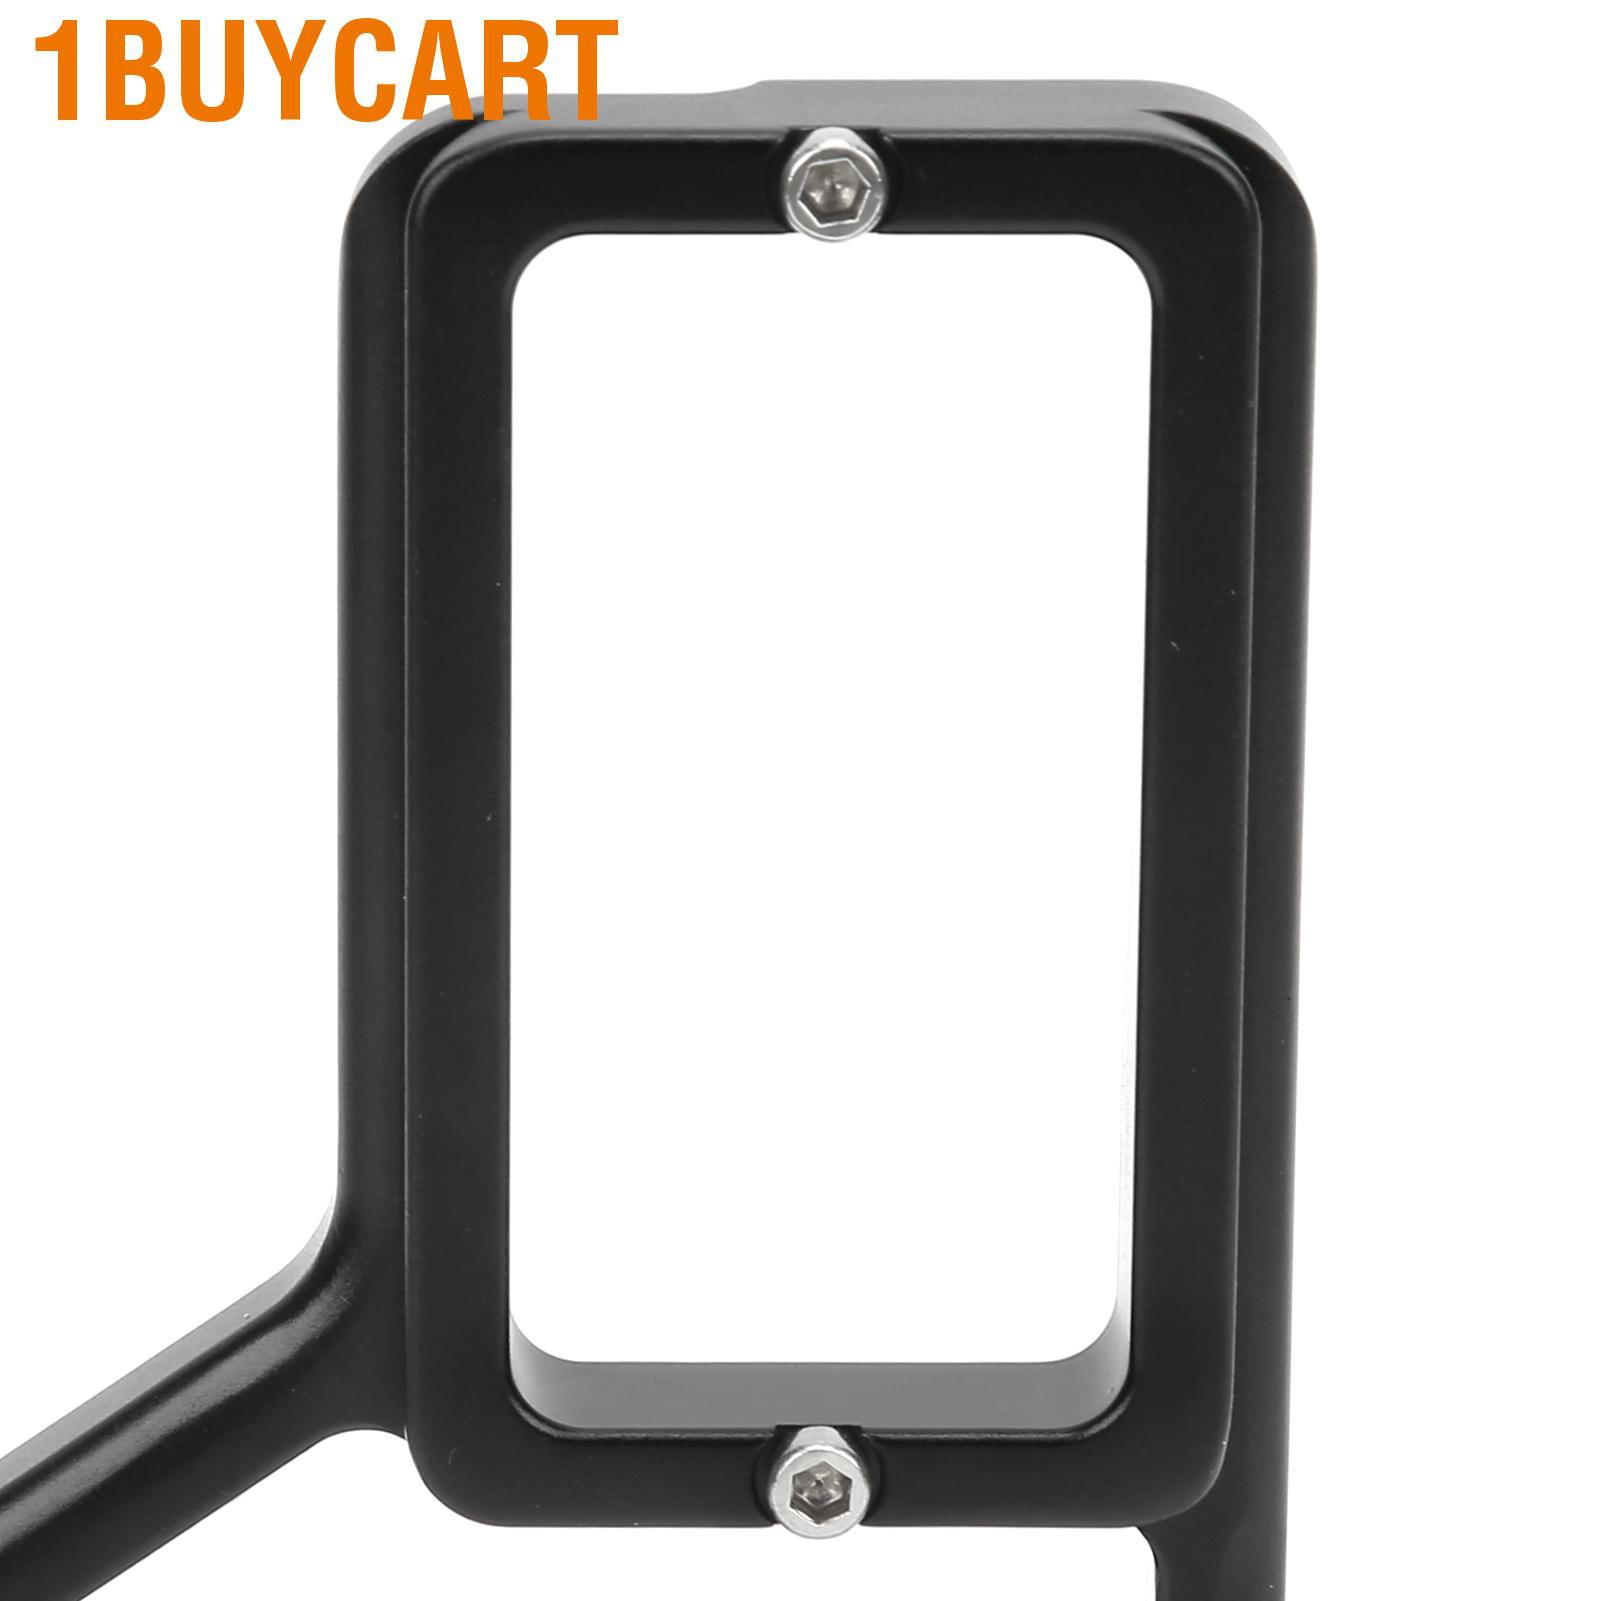 1buycart L Bracket Quick Release Plate Vertical Shooting with Battery Grip for Nikon D810 D800 D800E